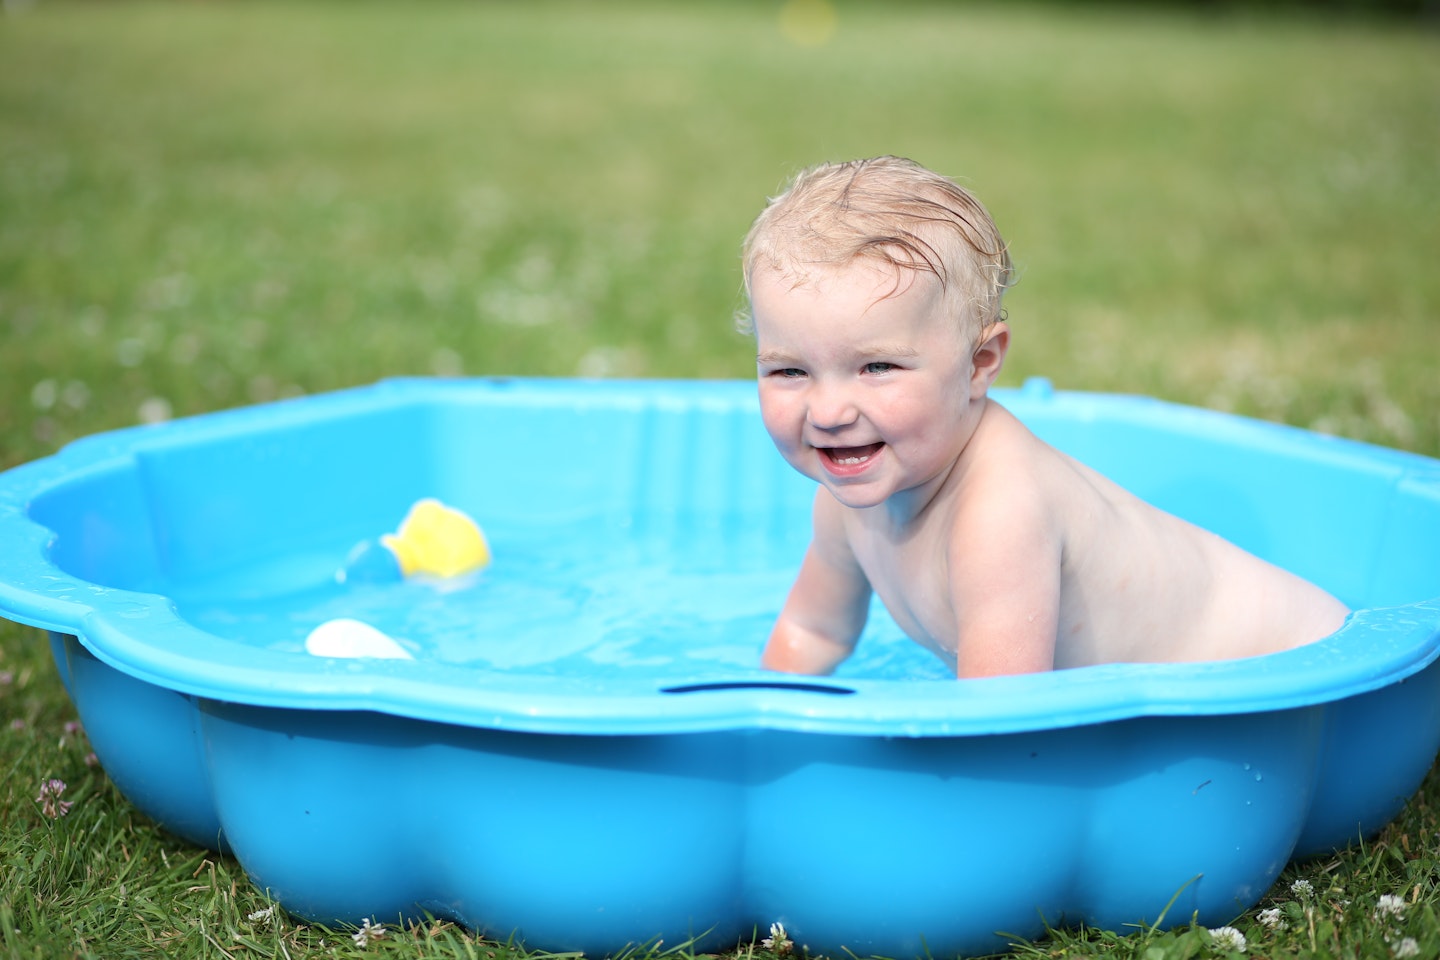 Paddling pool games to cool down your baby this summer